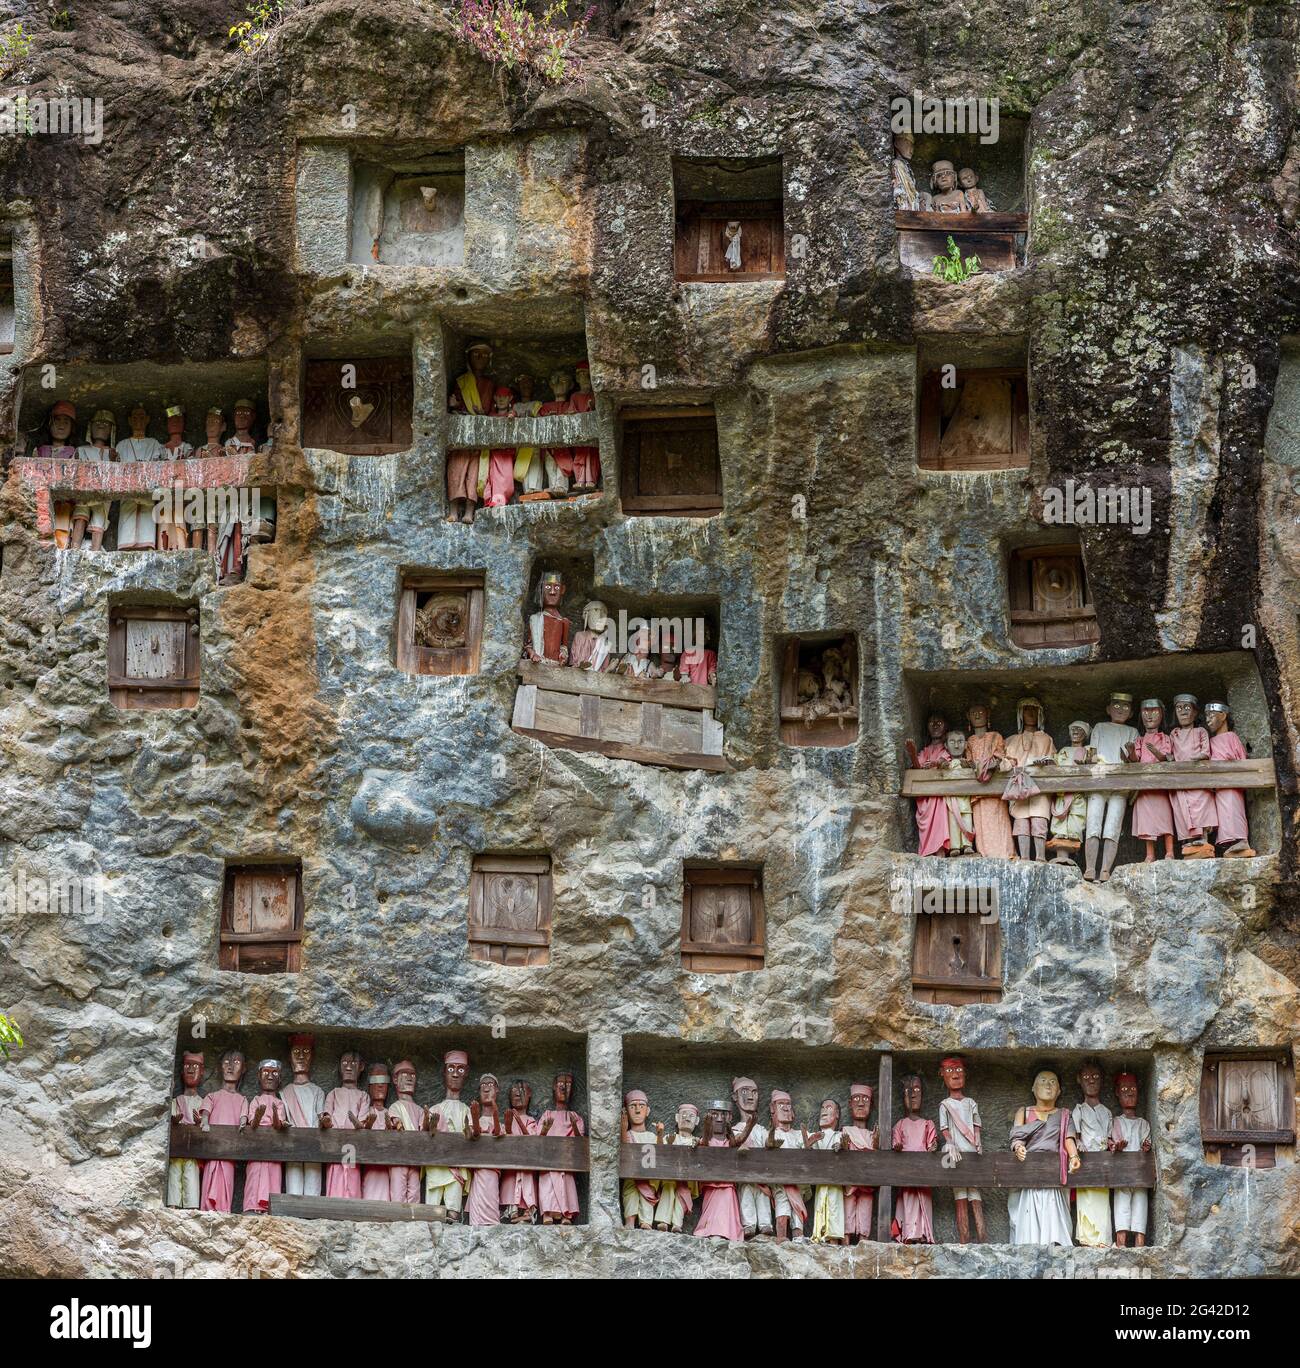 The rock tombs and galleries with Tau Tau of Lemo are a main attraction in Tana Toraja Stock Photo